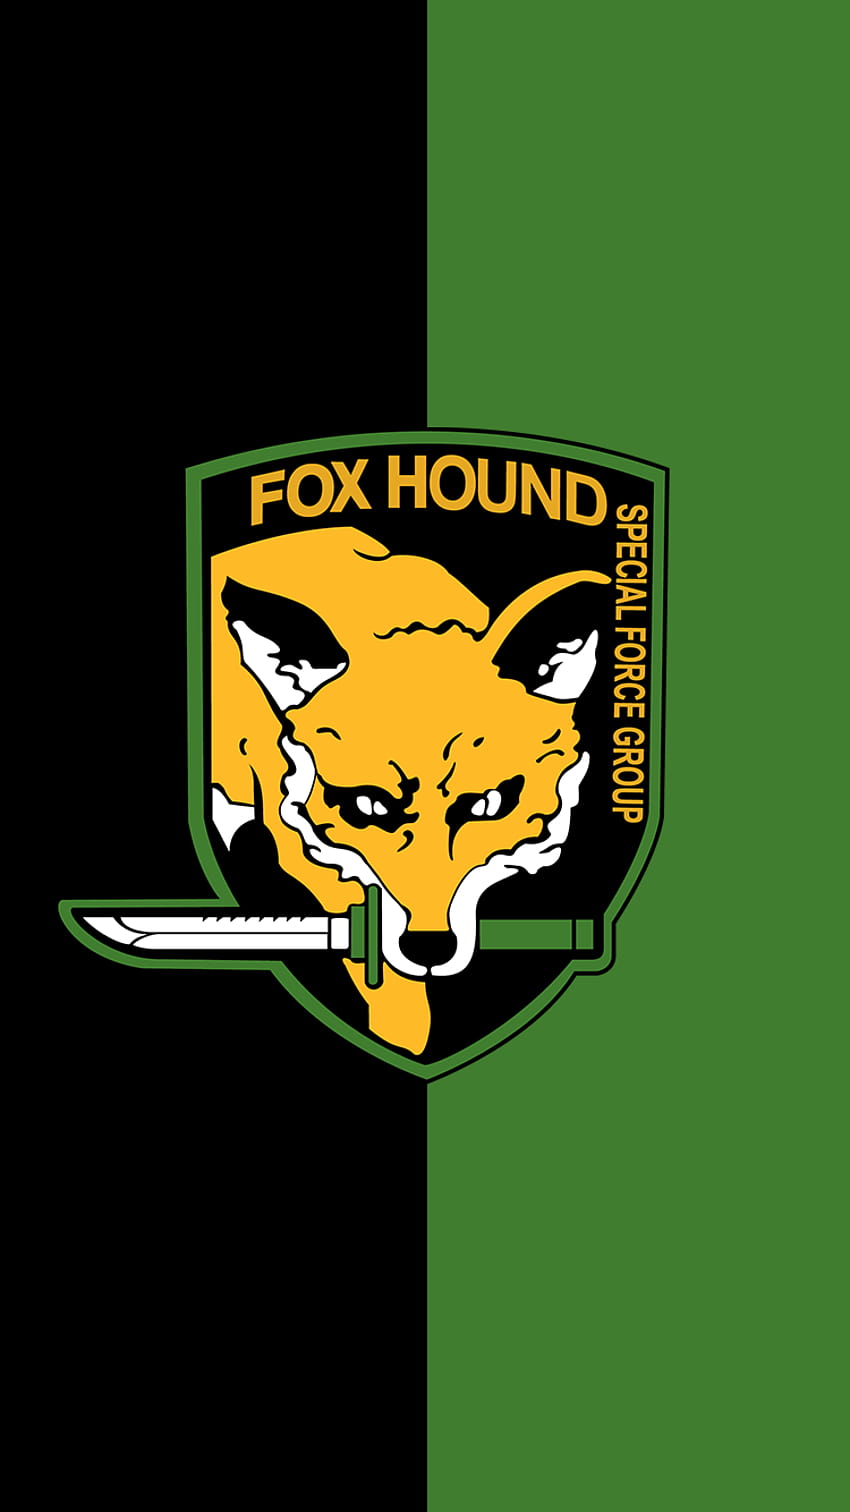 Here's a Foxhound . Enjoy! : metalgearsolid, foxhound mgs HD phone wallpaper